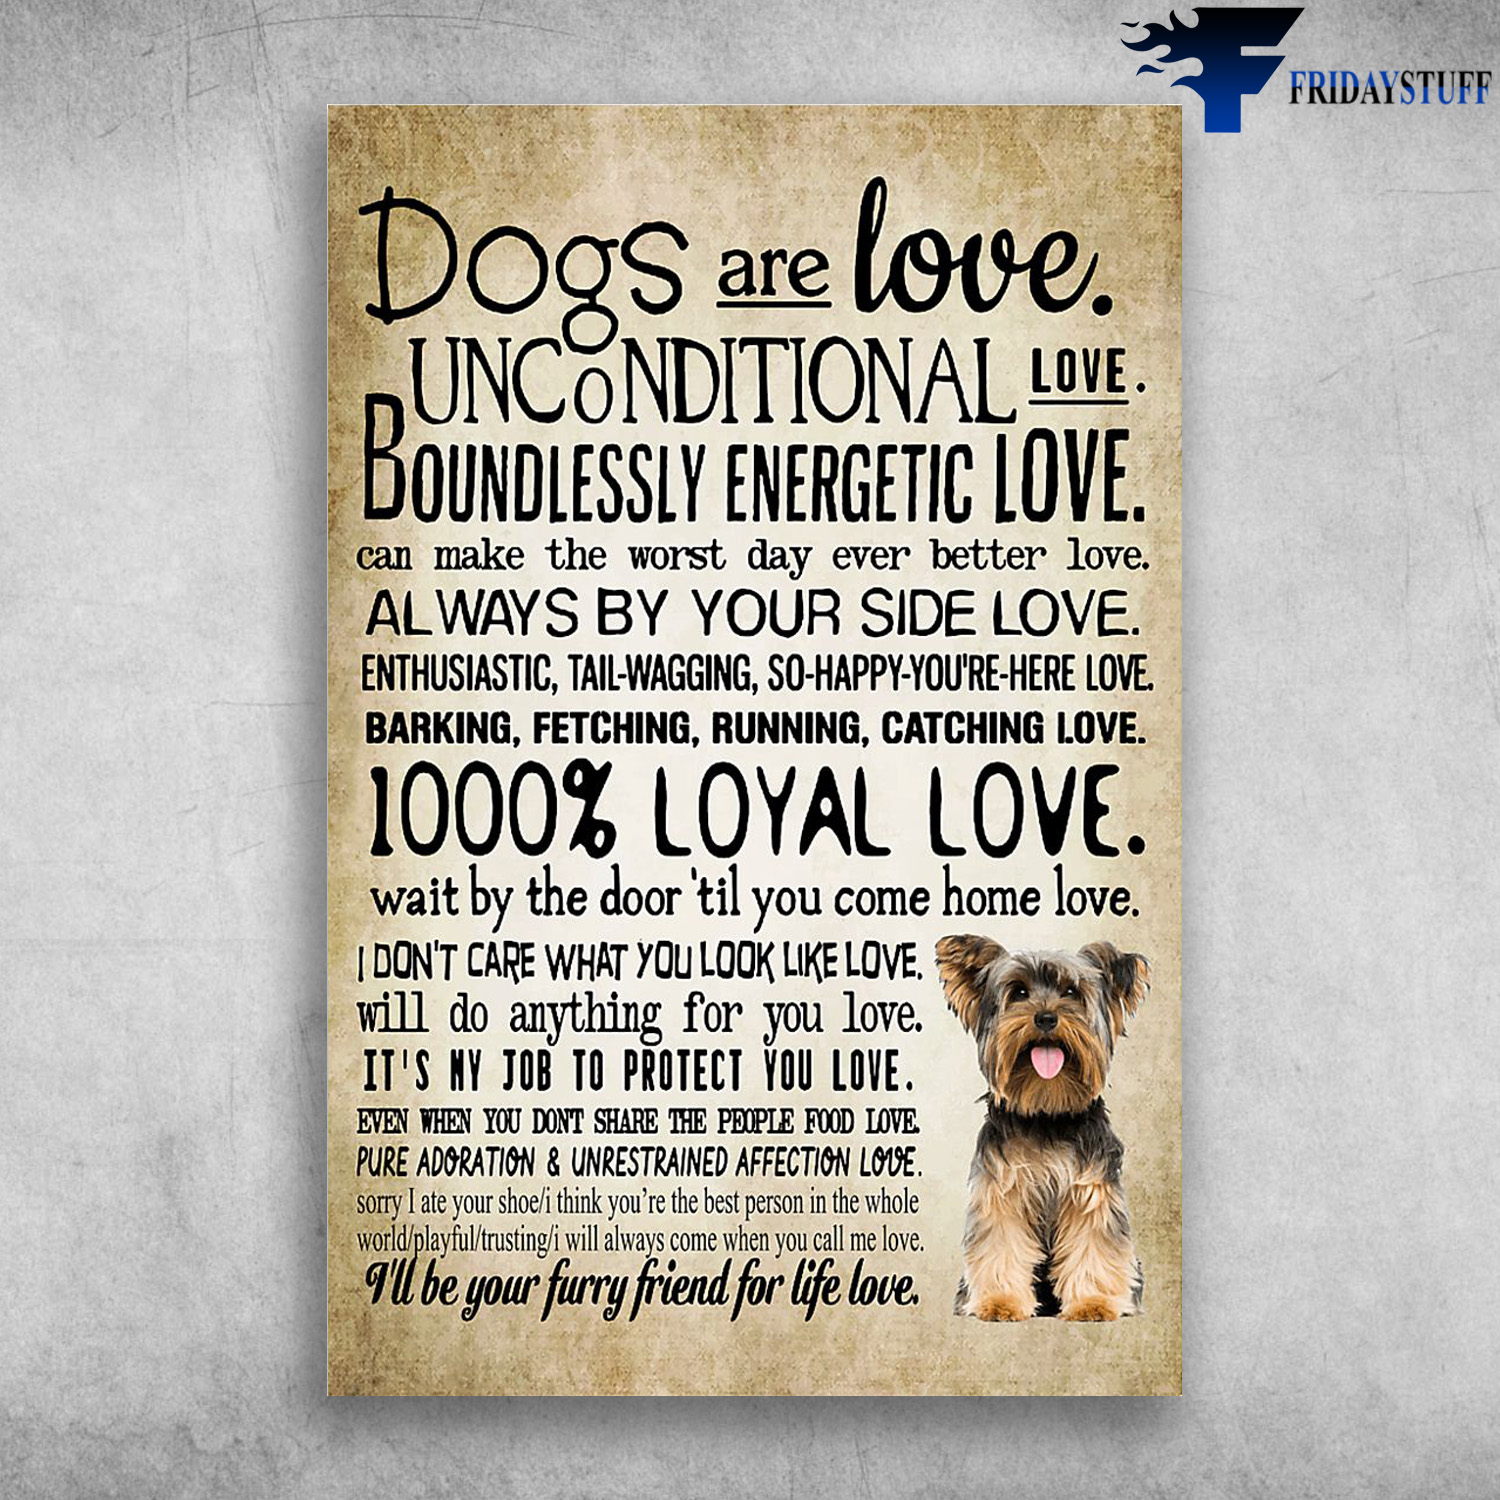 Unconditional Love Of A Dog - Dogs Are Love, Unconditional Love, Boundlessly Energetic Love